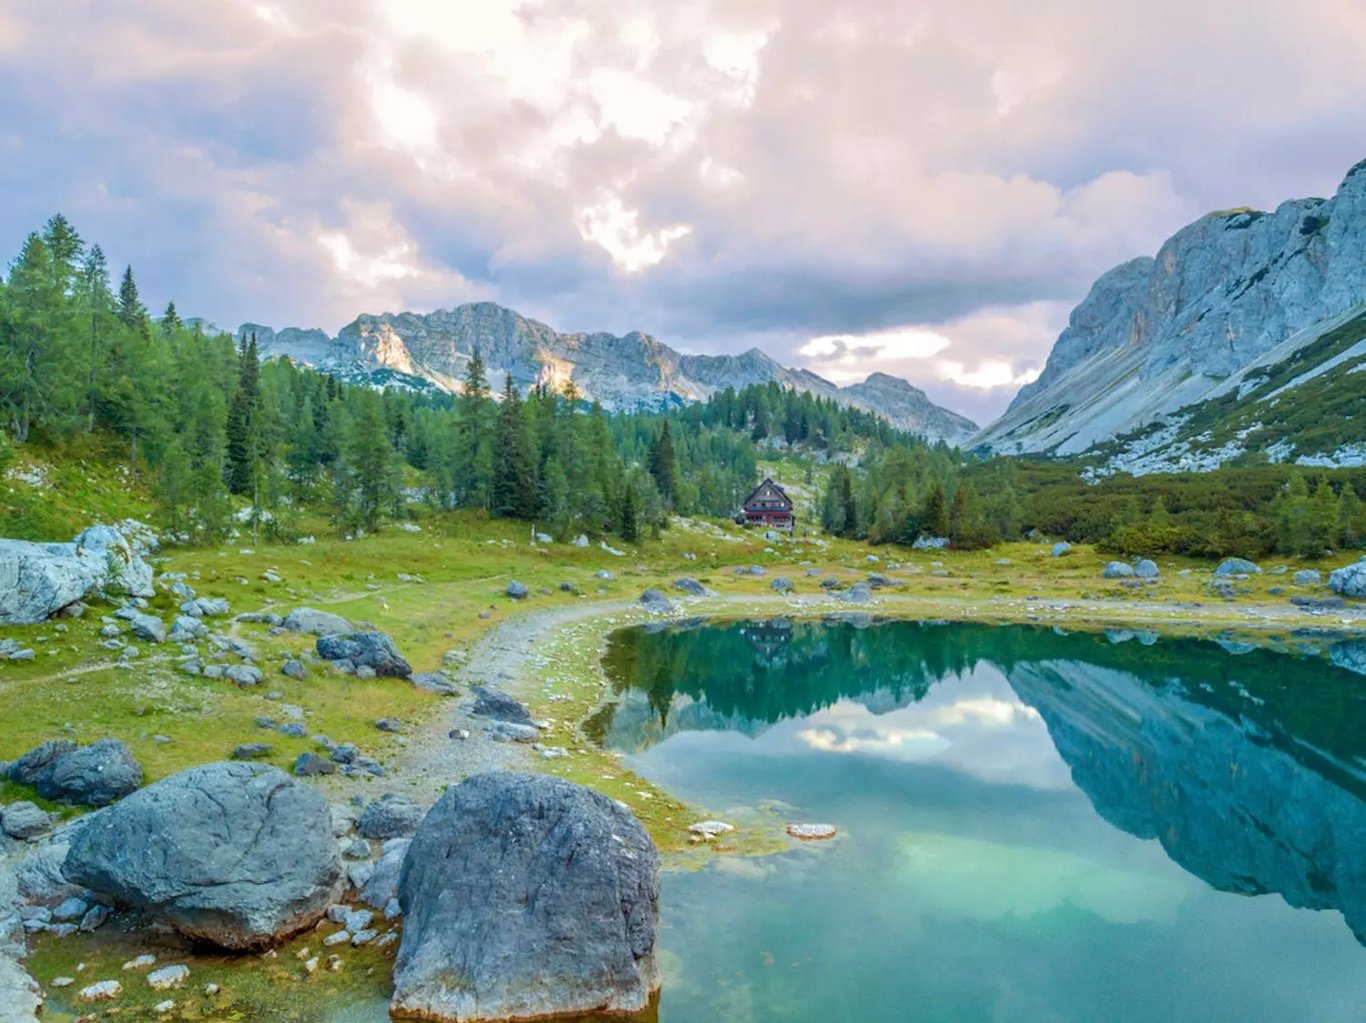 Double Lakes at Seven Lakes Valley - Triglav National Park